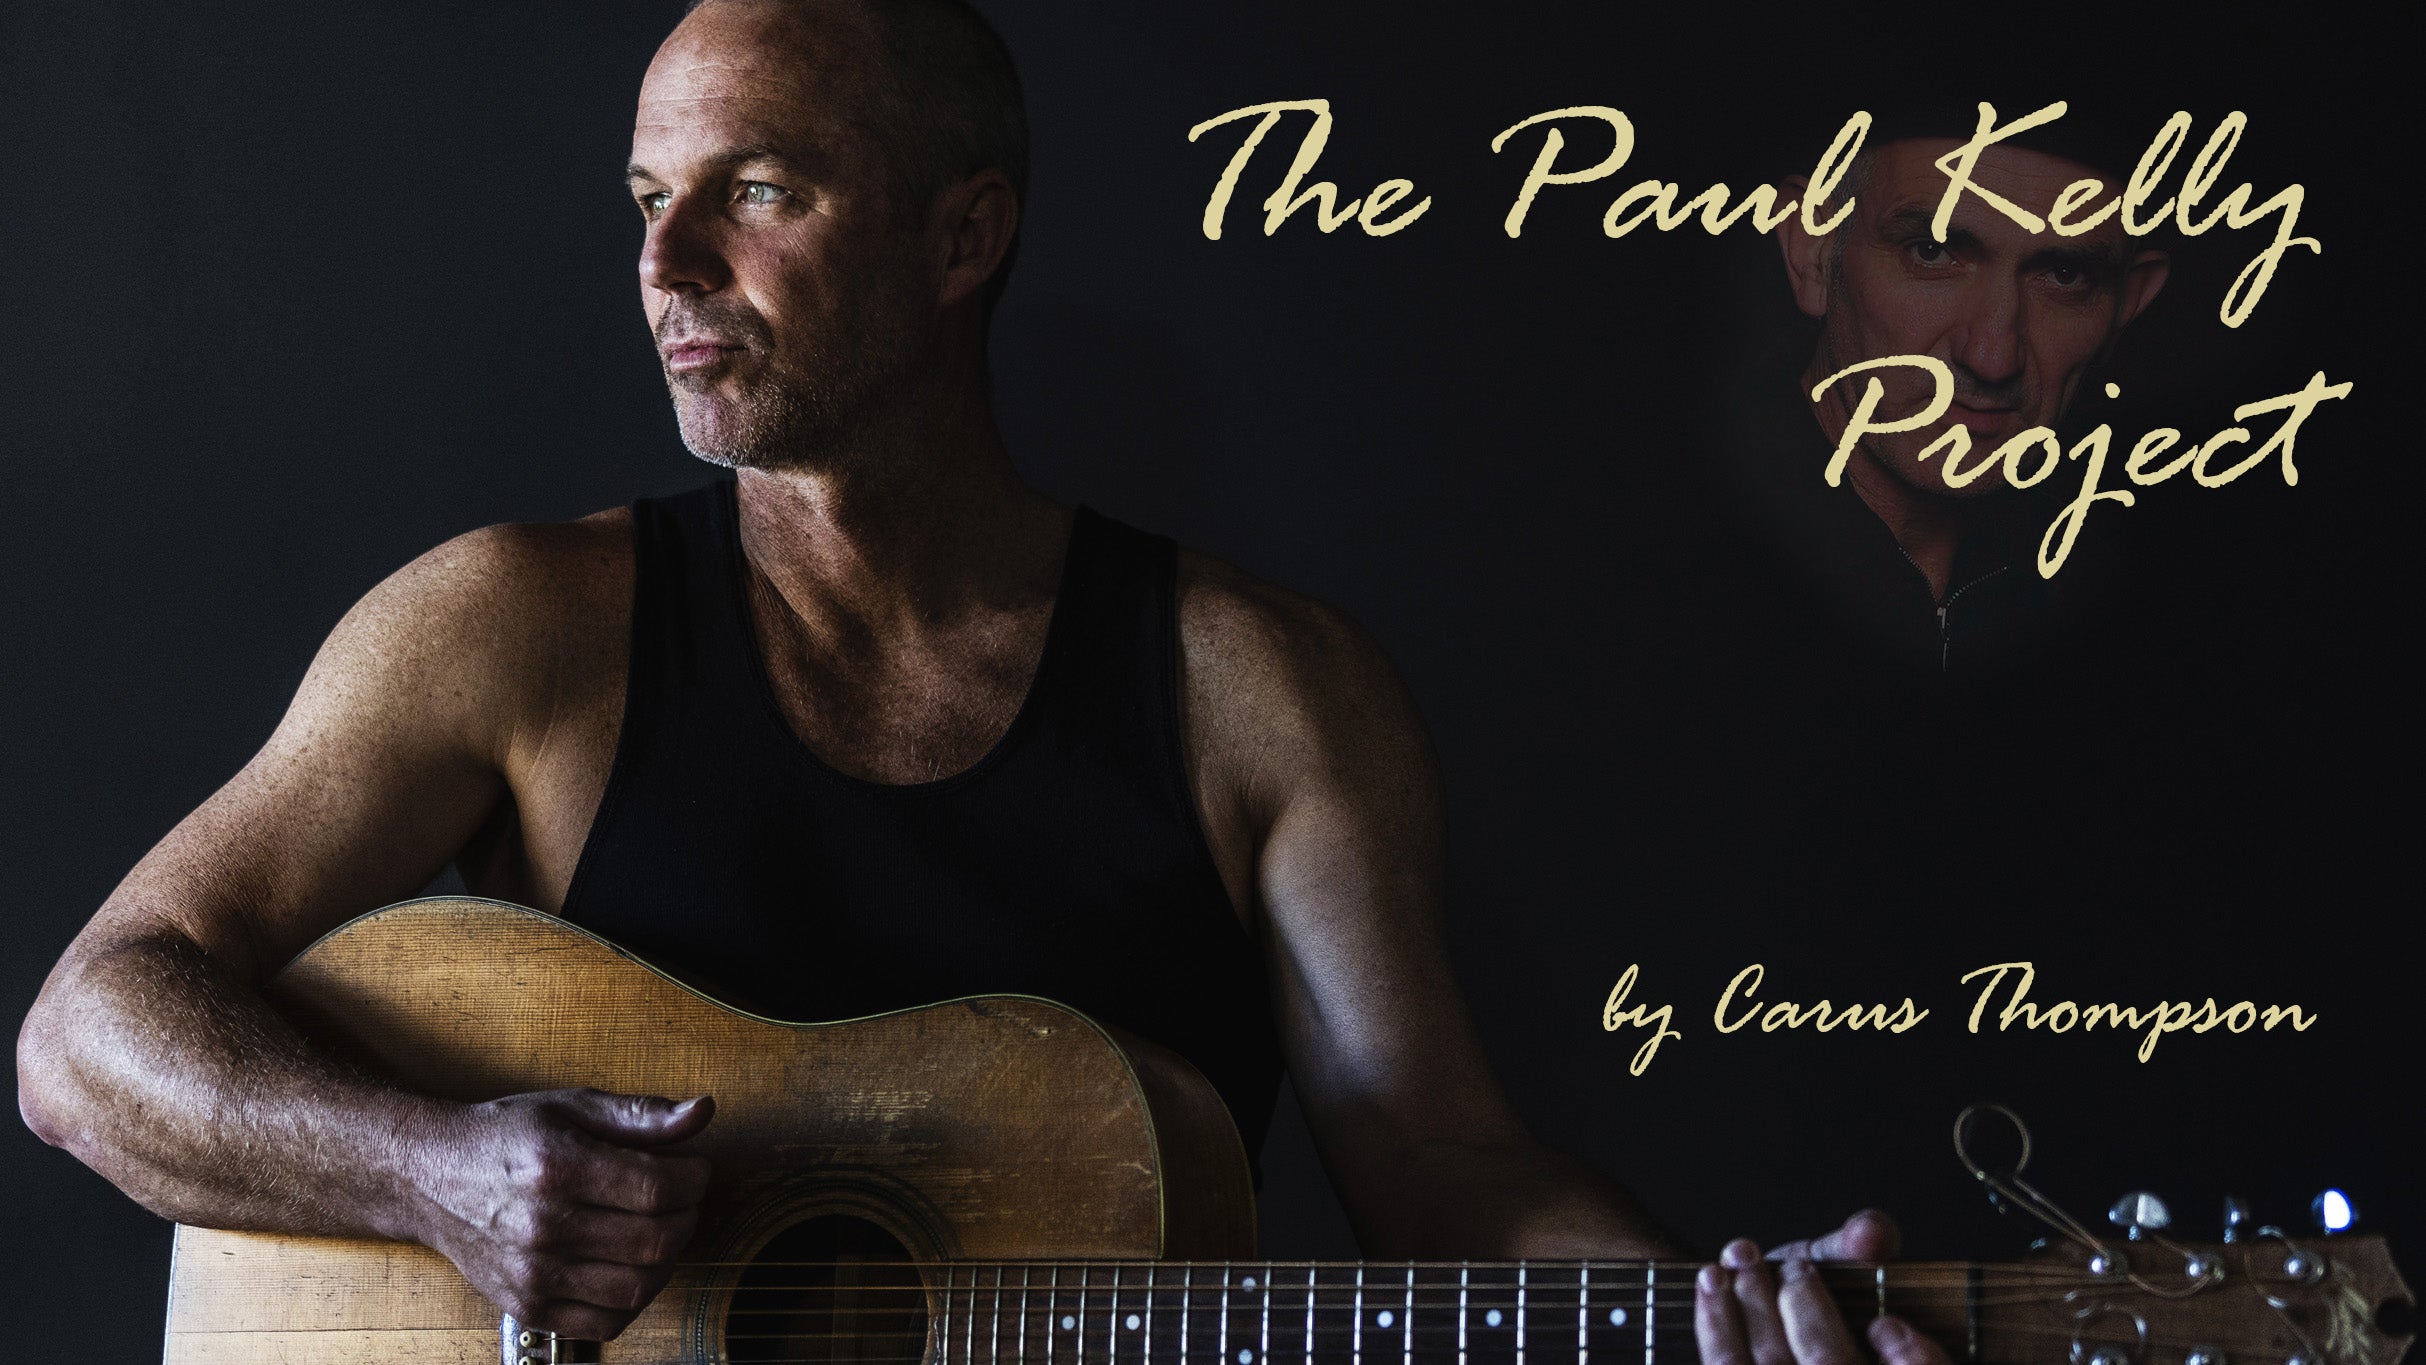 The Paul Kelly Project by Carus Thompson in City Beach promo photo for Wasup Onsale presale offer code